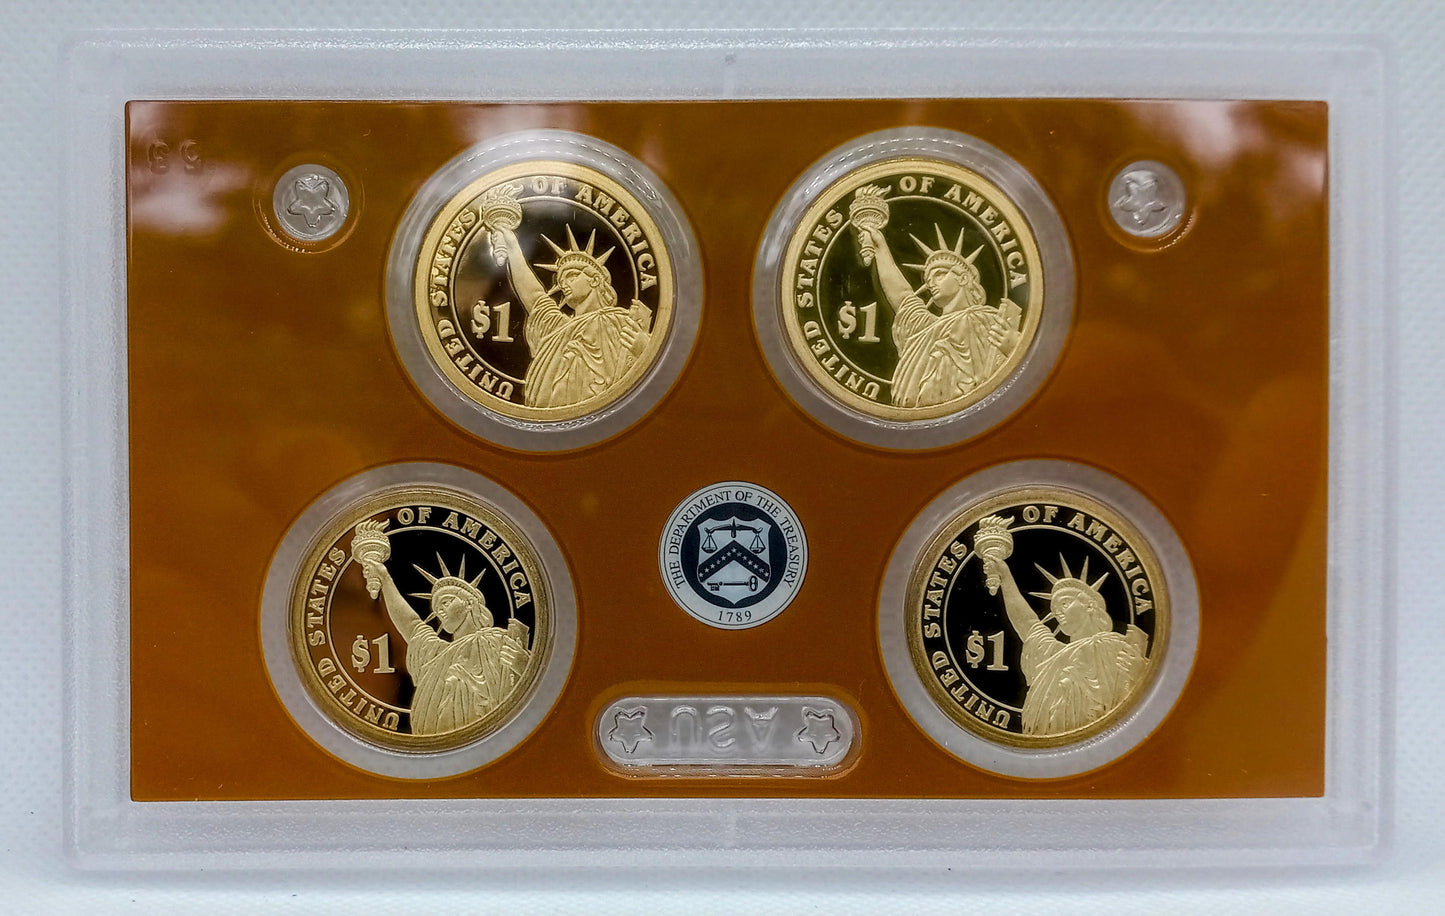 2015 United States Mint PRESIDENTIAL DOLLAR COIN PROOF SET With OGP & COA!